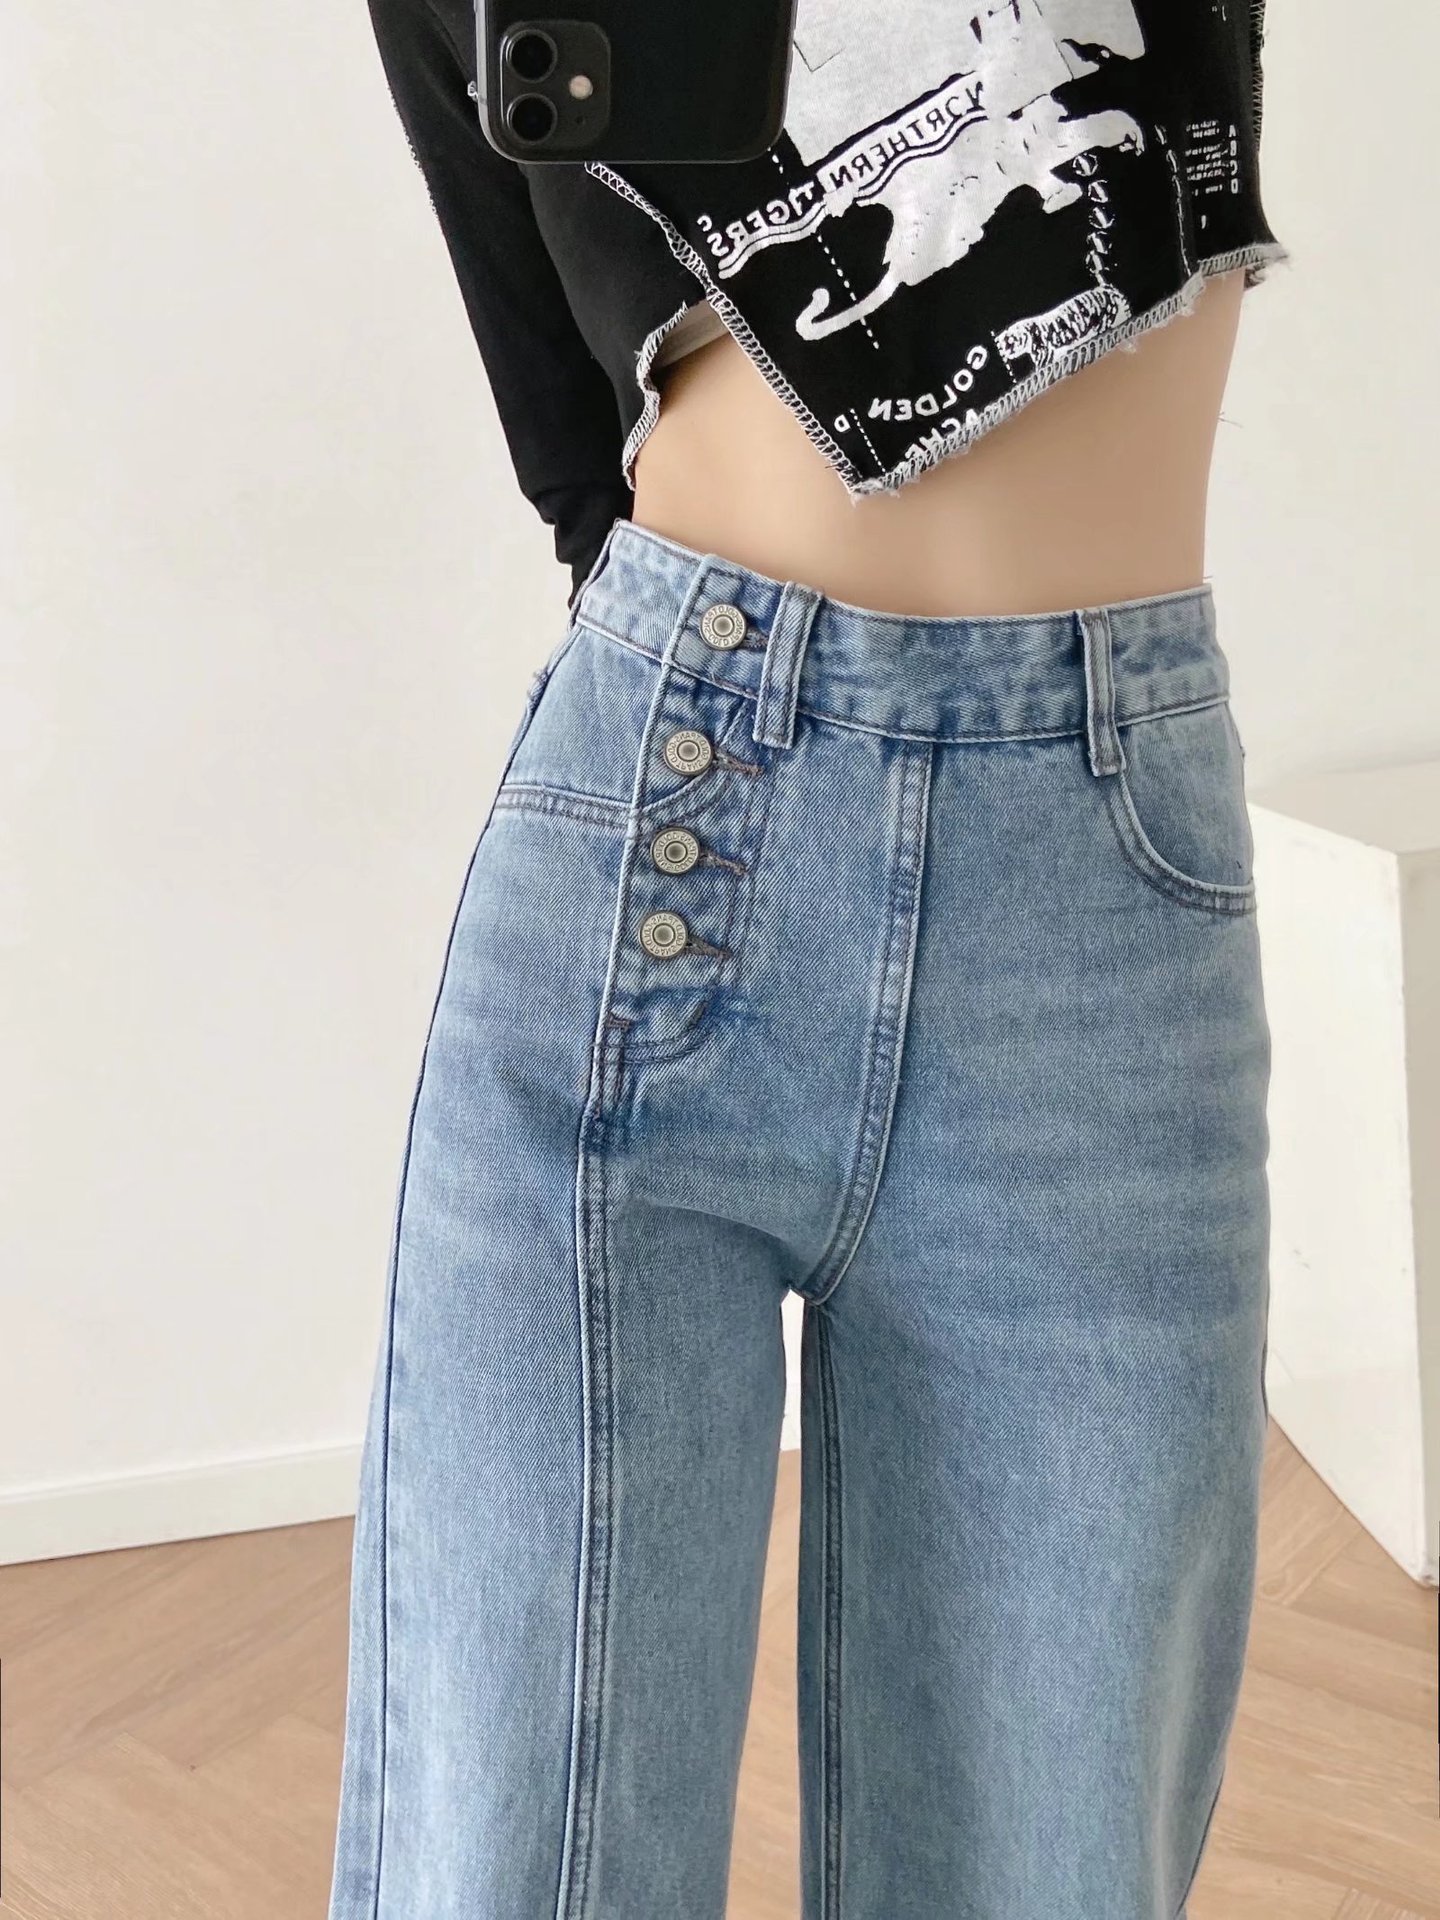 European and American Style Irregular Breasted High Waist Jeans Women's Jeans Elegant Loose Raw Hem Straight-Leg Trousers Draping Mopping Pants